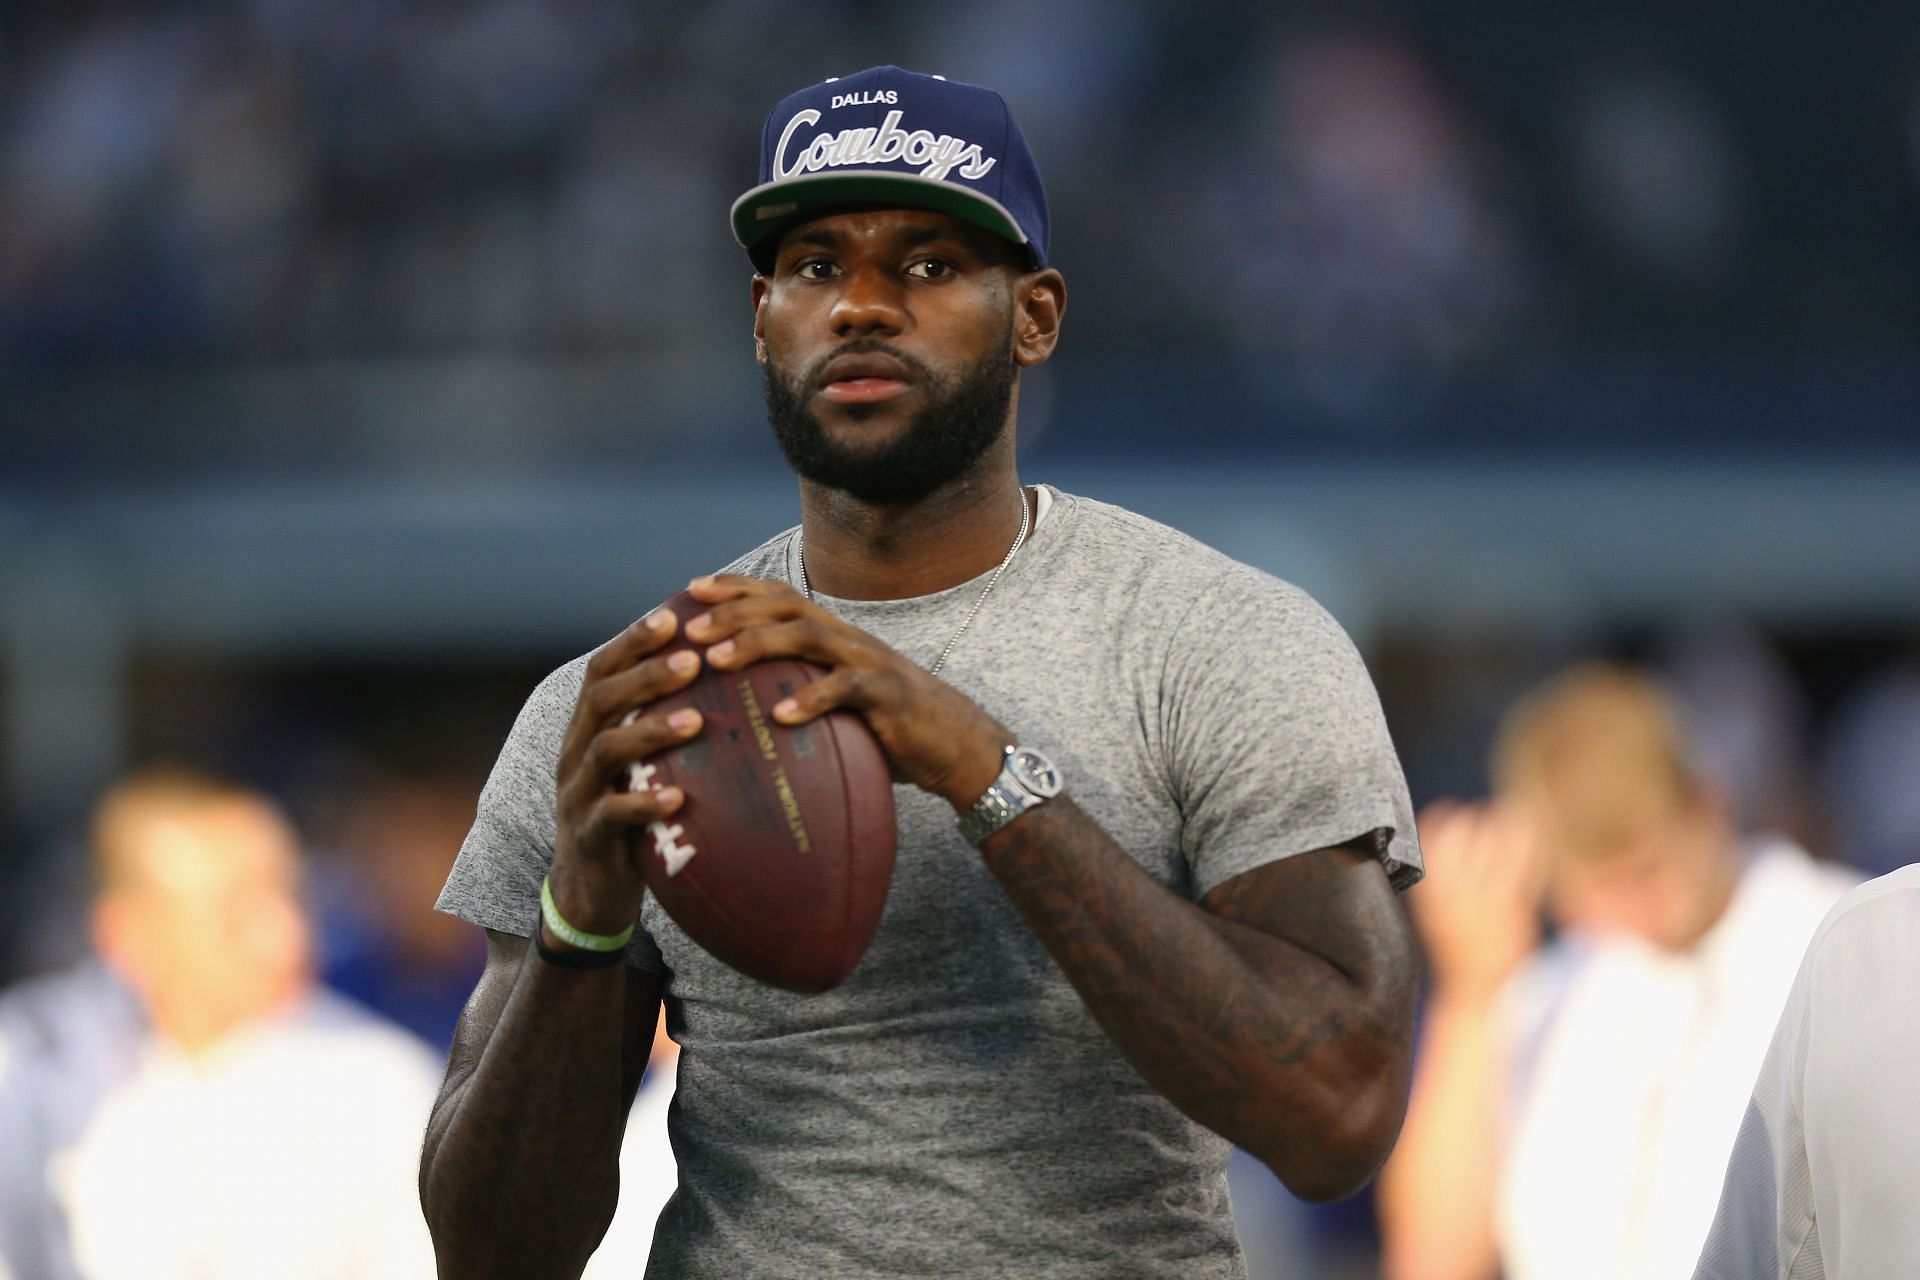 LeBron James watching a Dallas Cowboys game in 2013